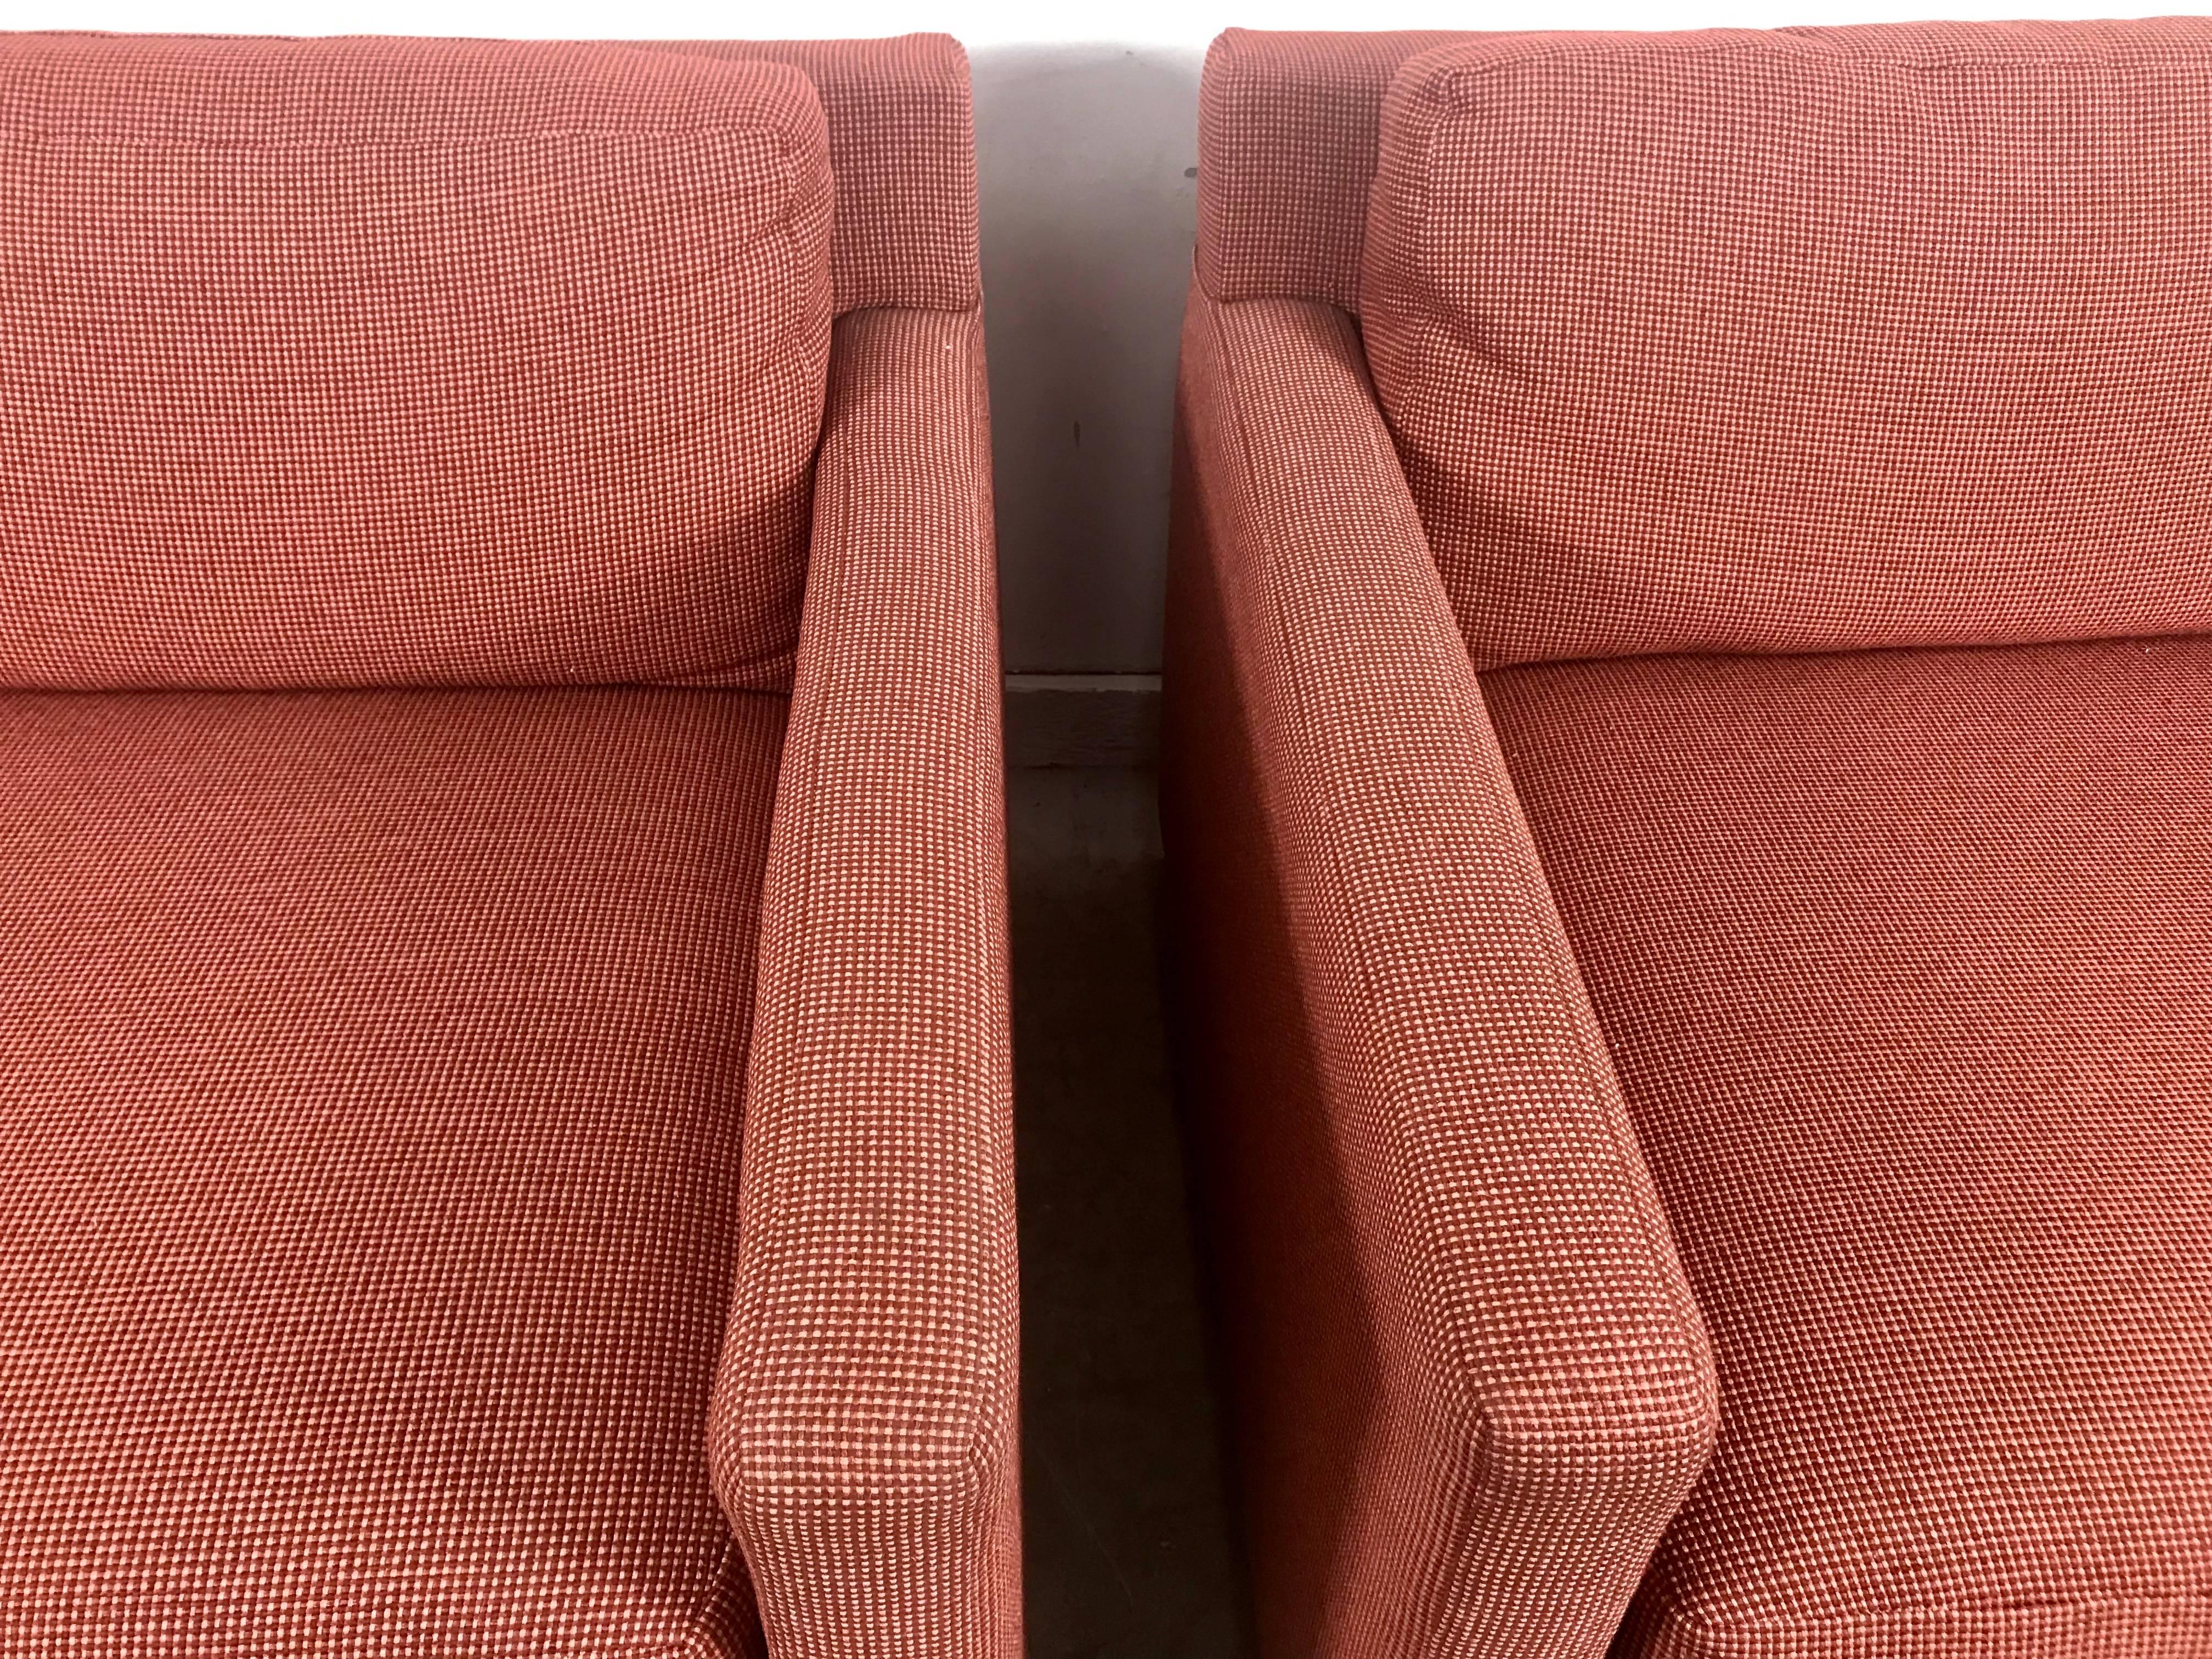 Stunning Pair of Cube Lounge Chairs Attributed to Milo Baughman In Good Condition For Sale In Buffalo, NY